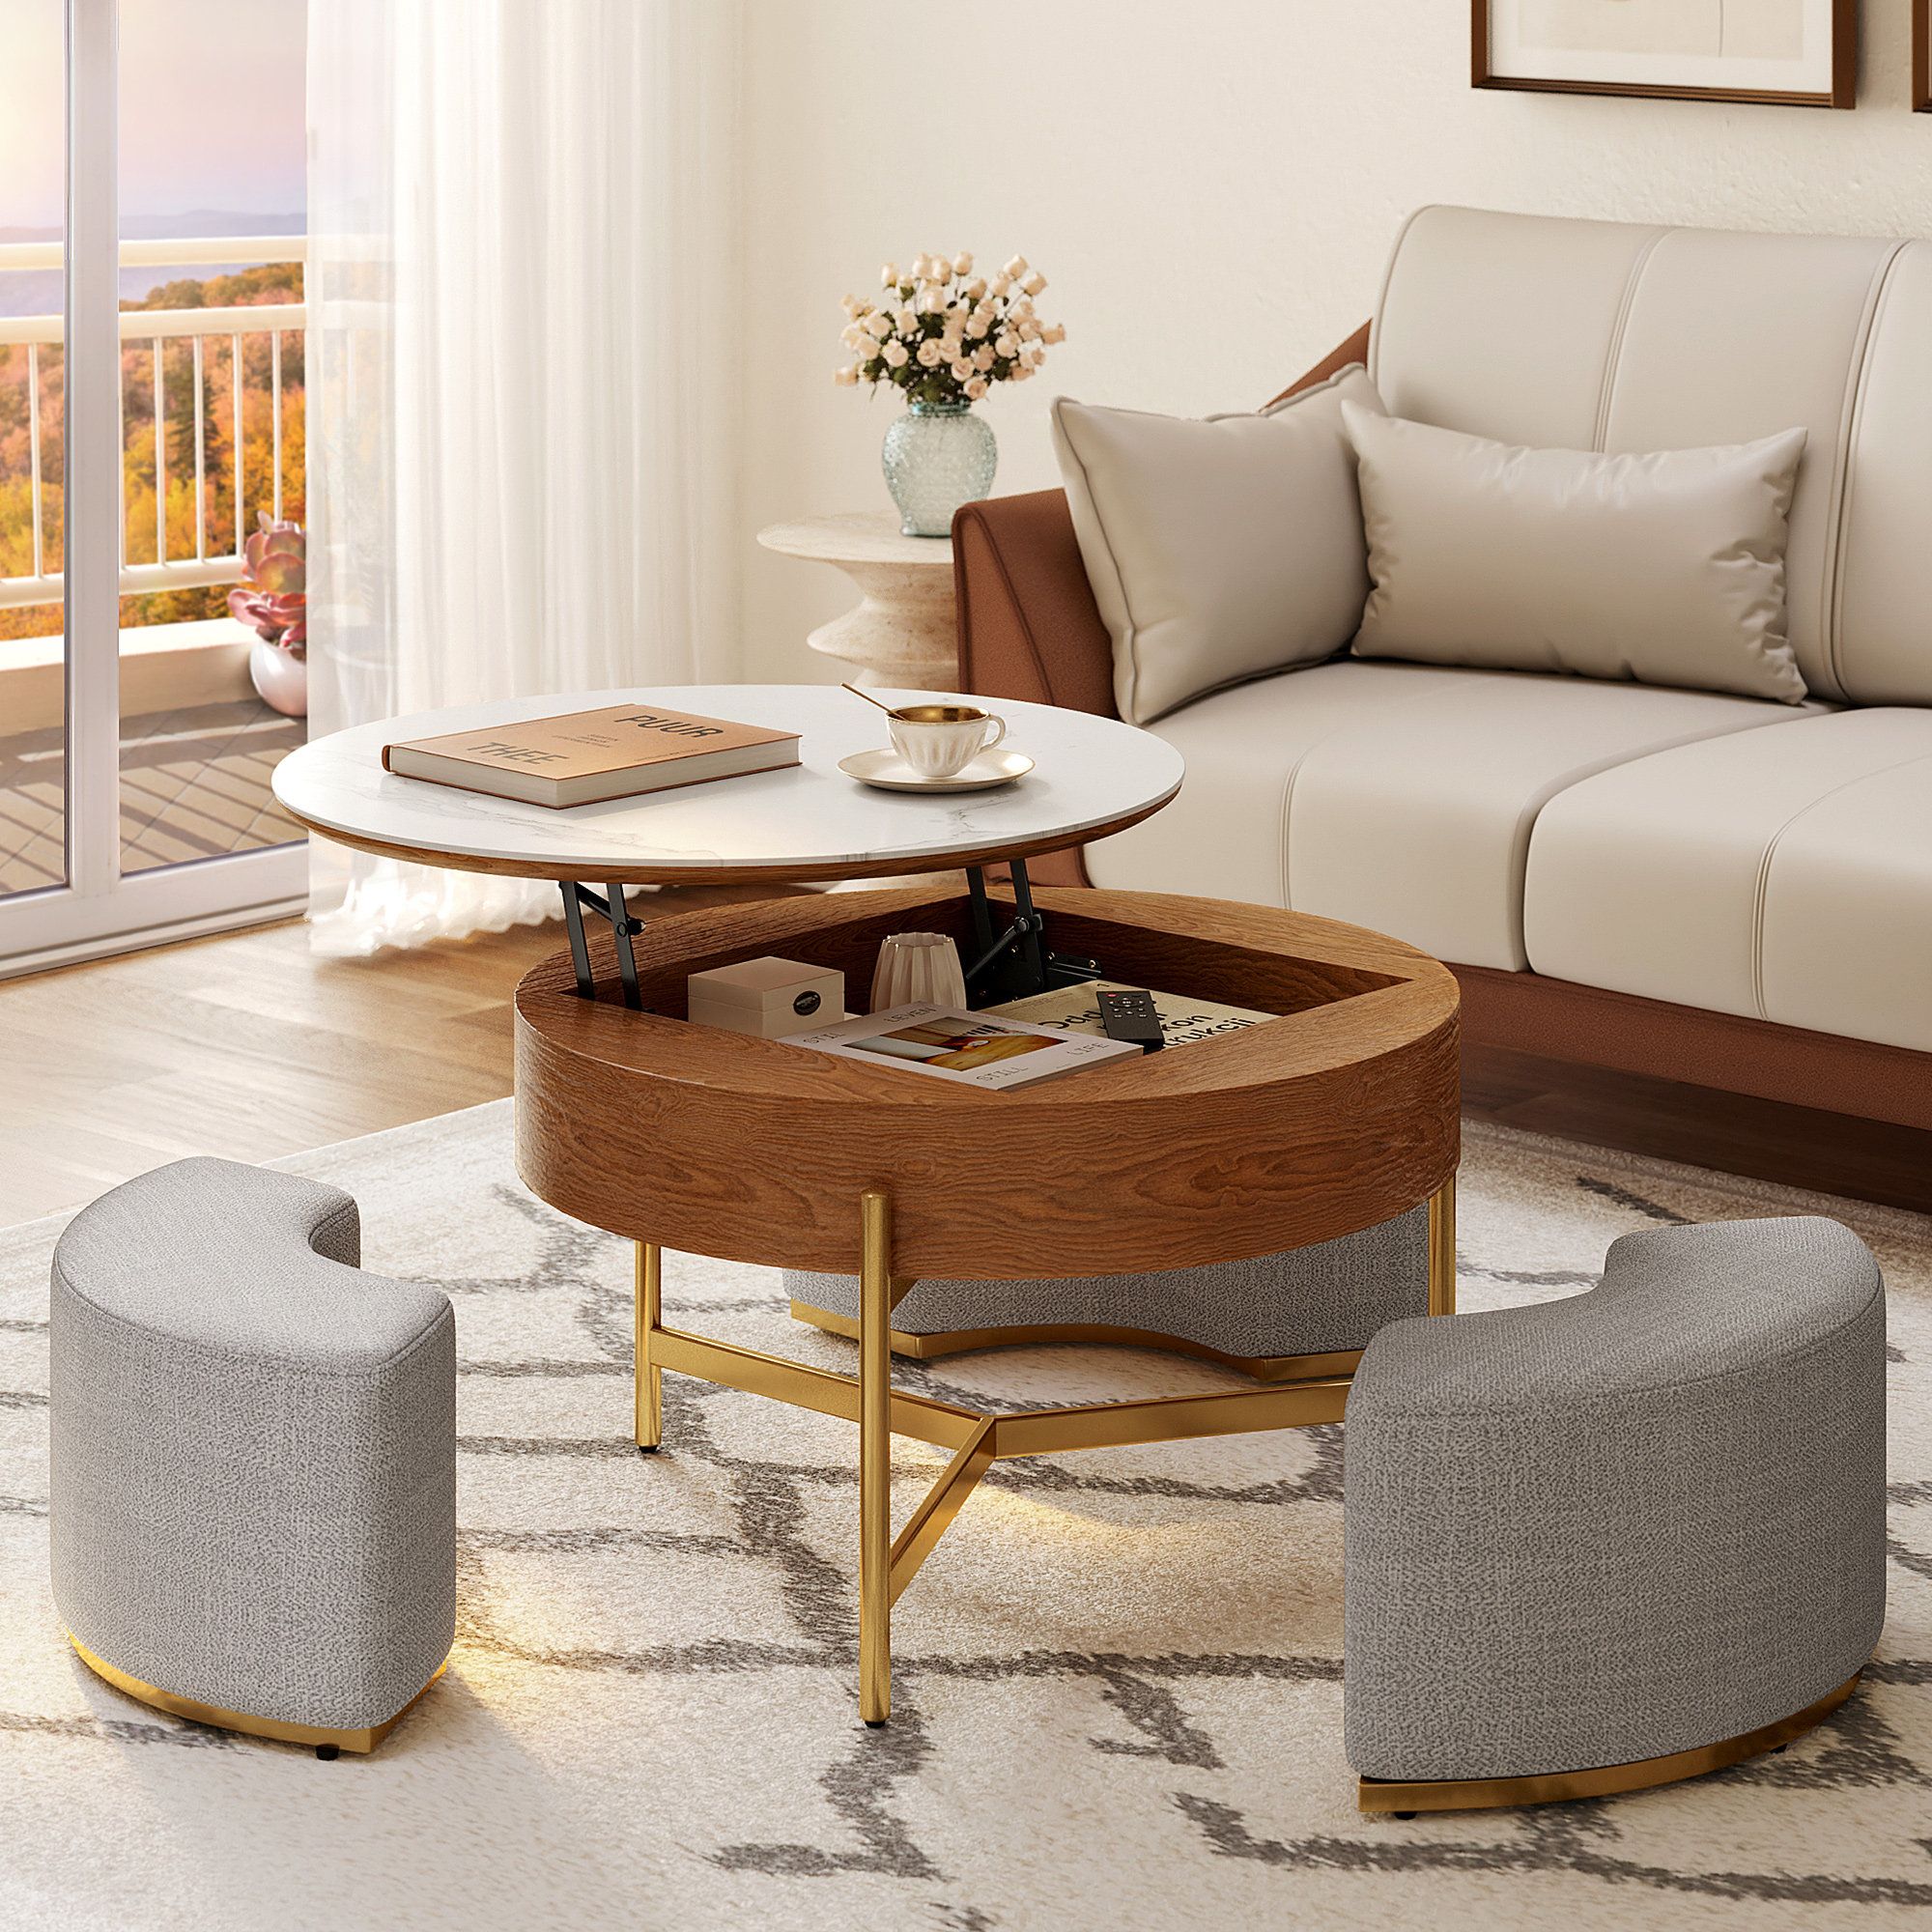 Everly Quinn Sohad Lift Top Extendable Frame Coffee Table With Storage &  Reviews | Wayfair For Lift Top Coffee Tables (View 2 of 15)